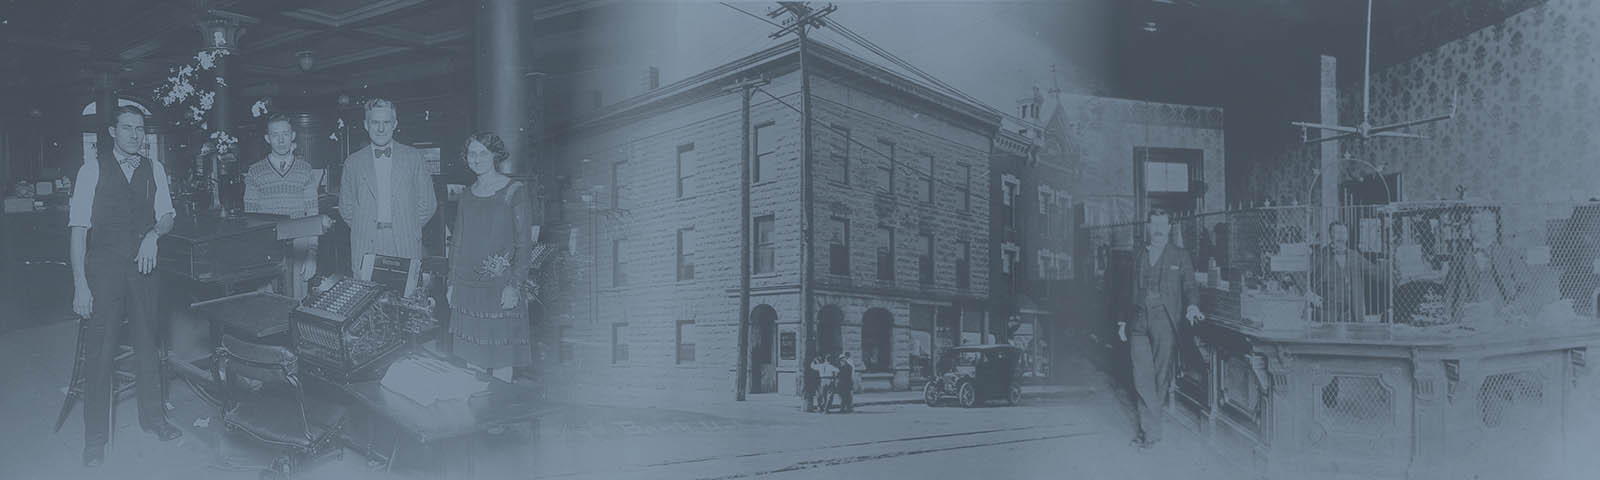 Vintage images of Busey Bank